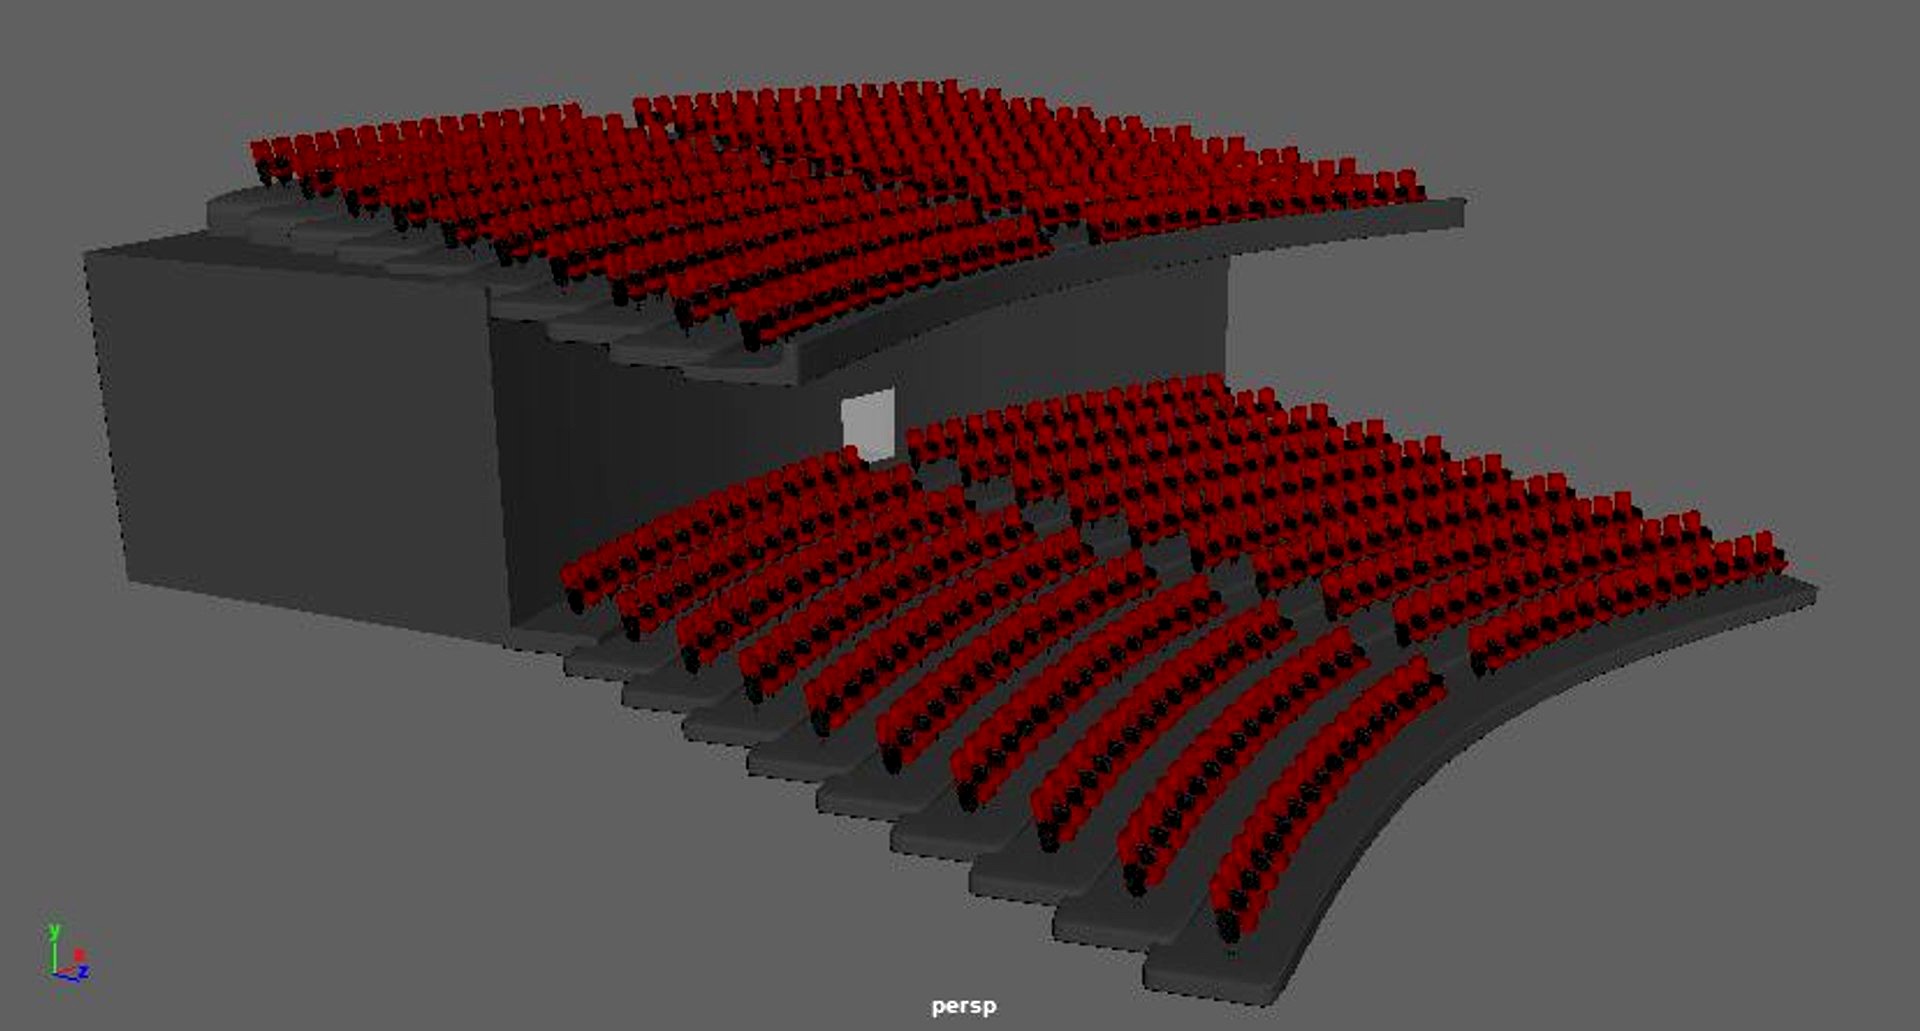 theater for( cinema, collage, etc.)